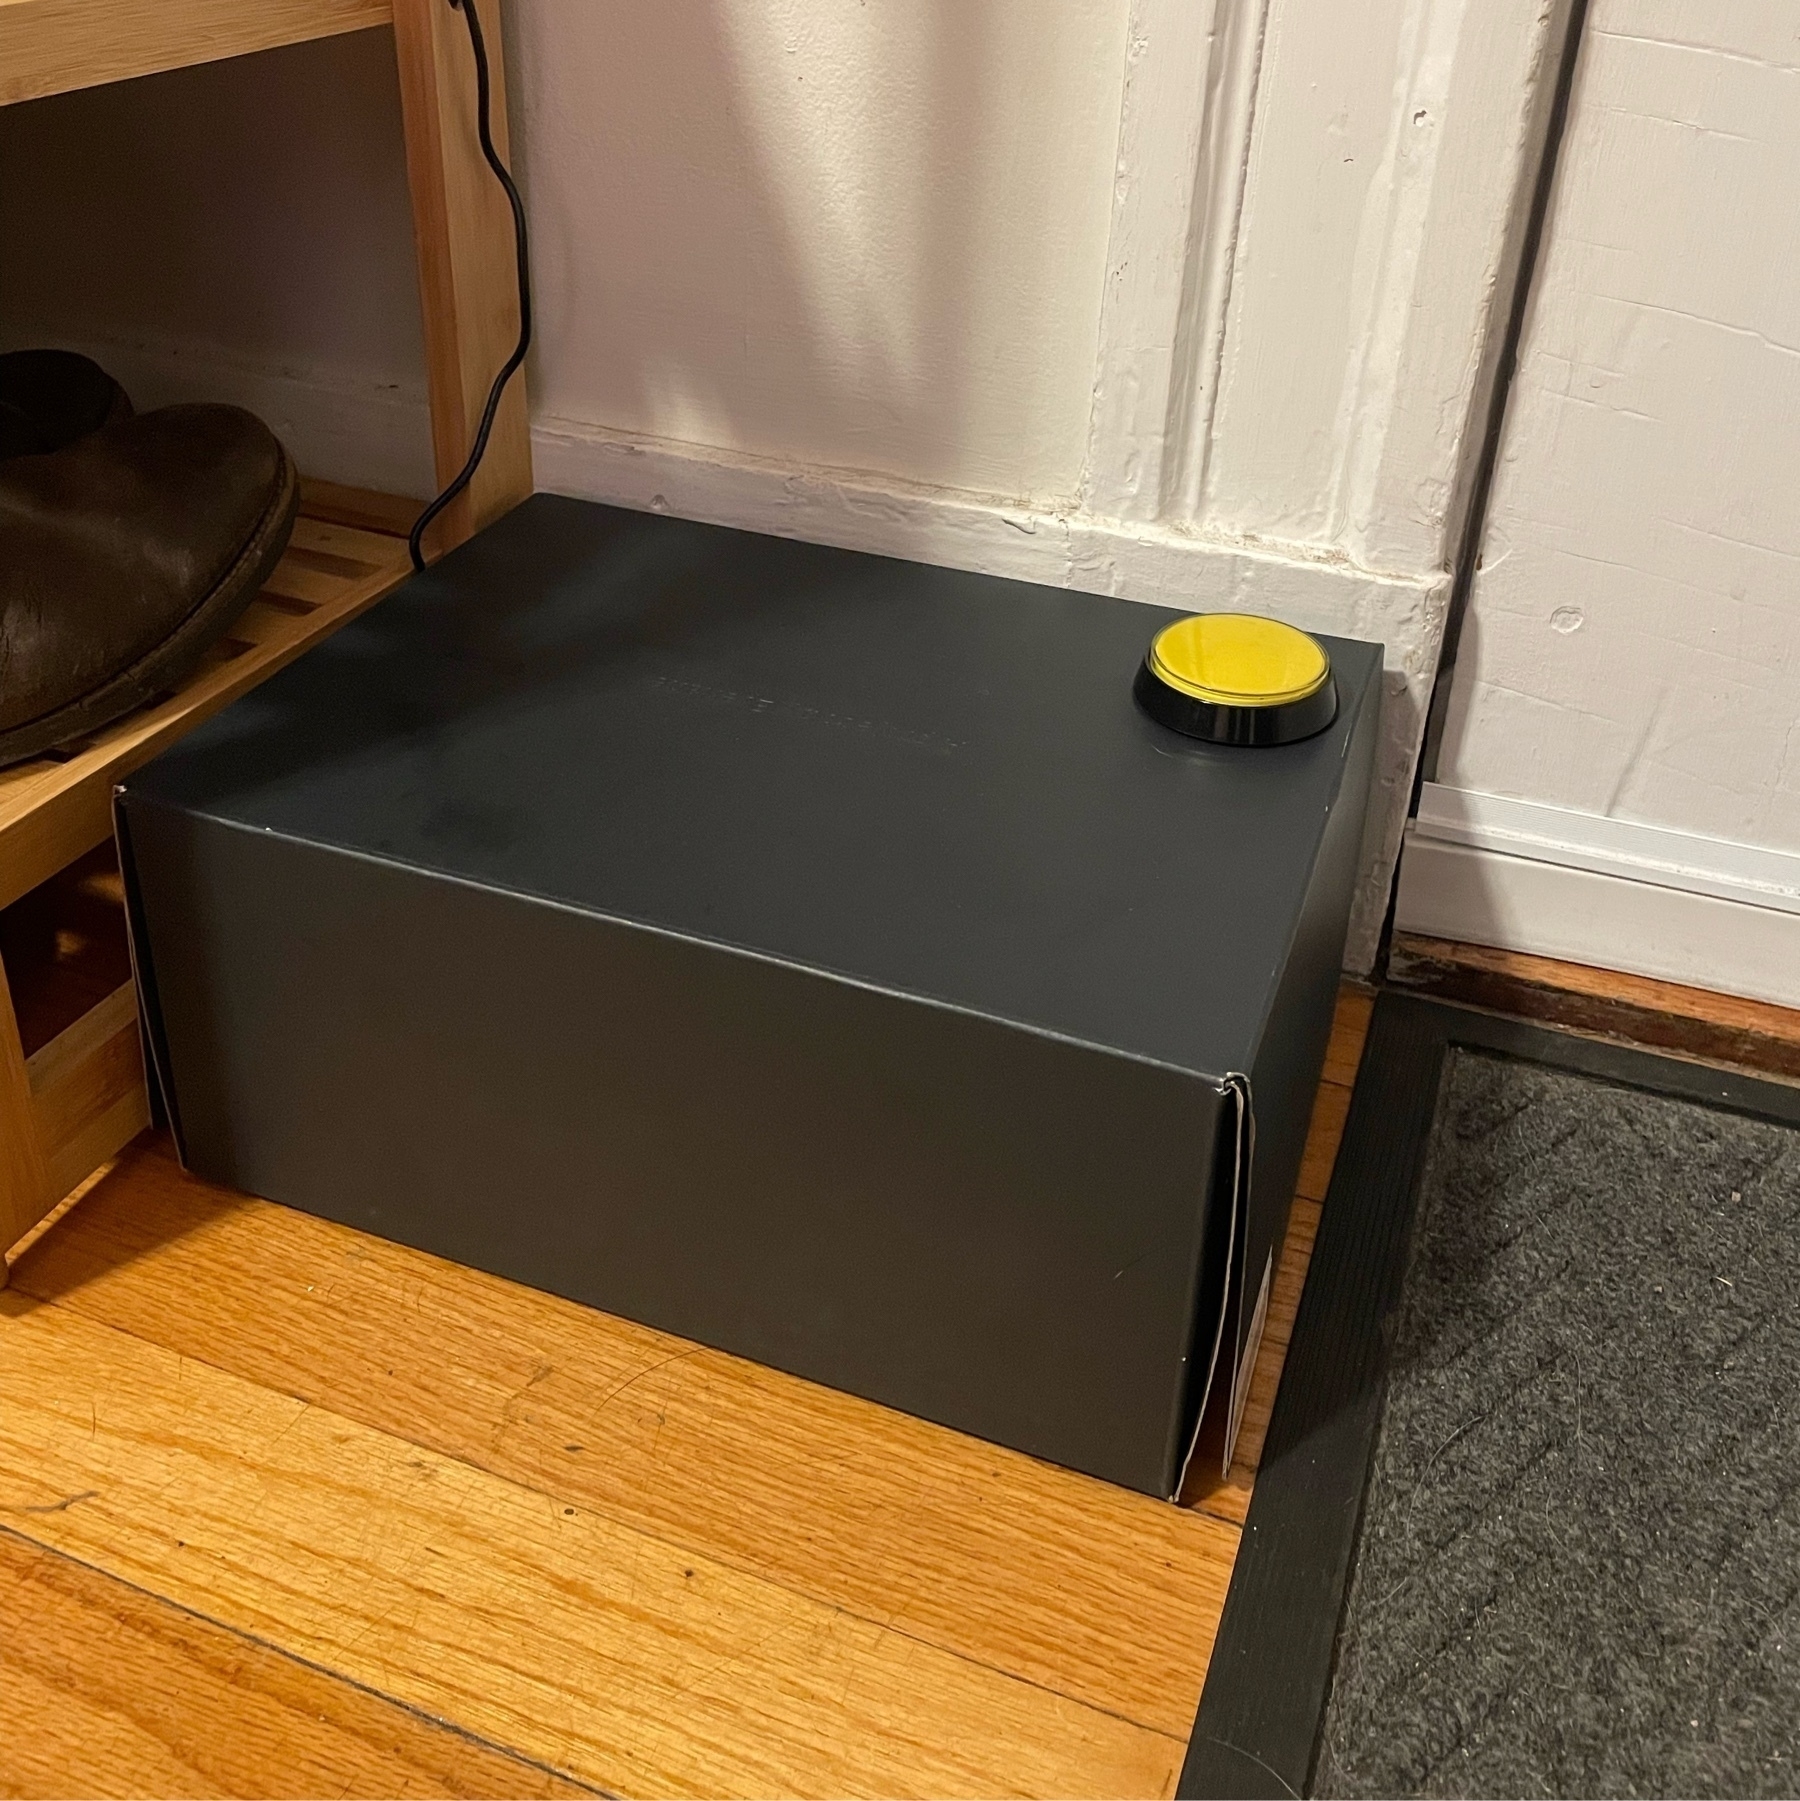 dark shoebox with a yellow button on it sitting next to a door.